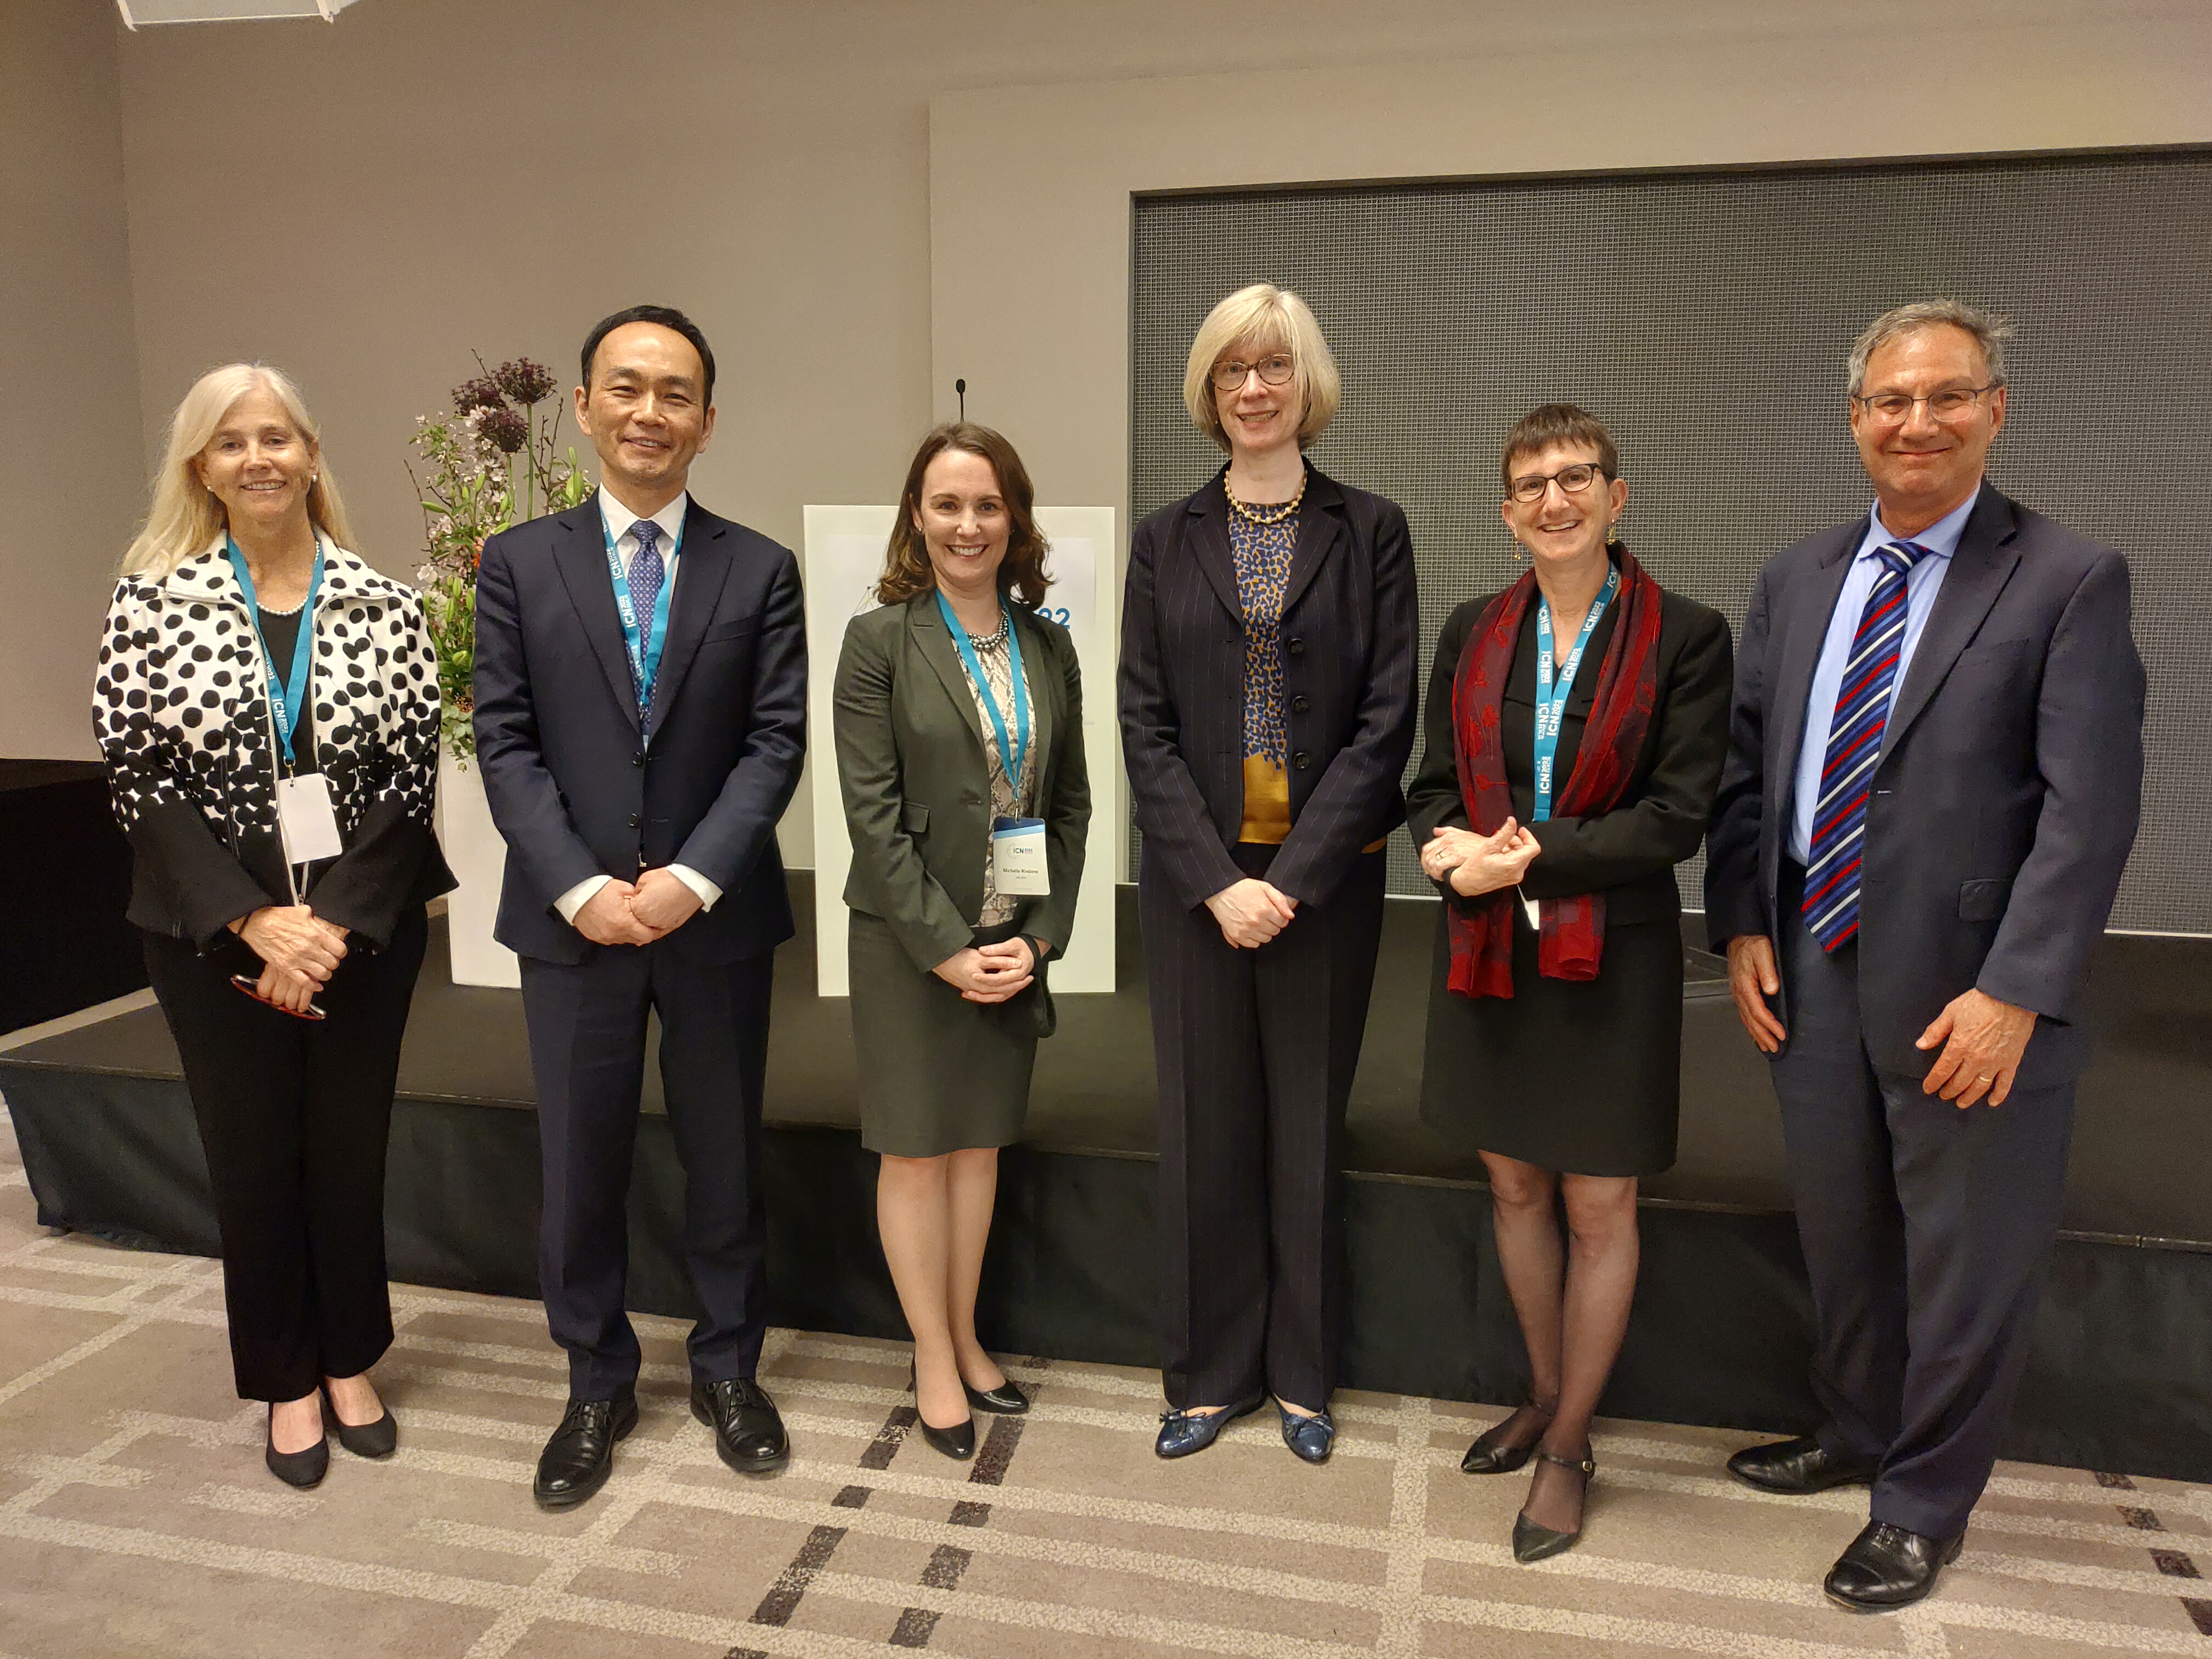 A photo of Vice Chairperson（Dr. Andy CHEN）posing with the officials from USFTC and USDOJ during the 2022 ICN Annual Conference at Berlin, Germany.